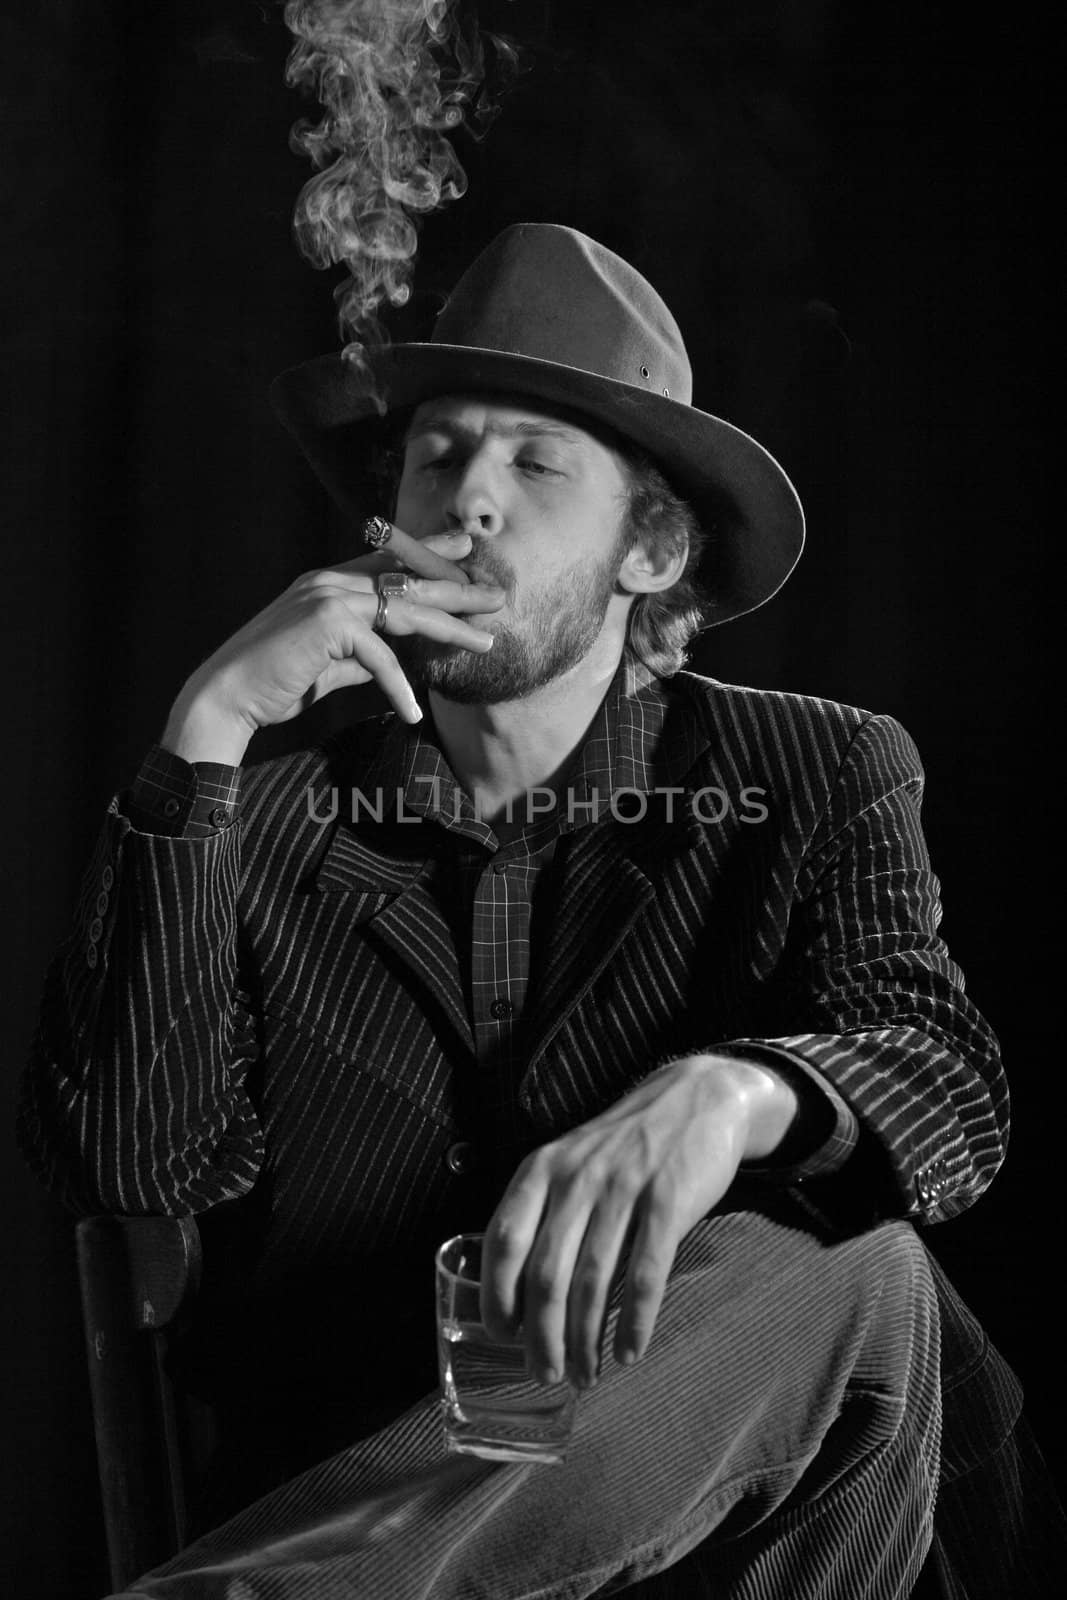 A handsome man in a hat sitting with a glass of alcohol and cigar